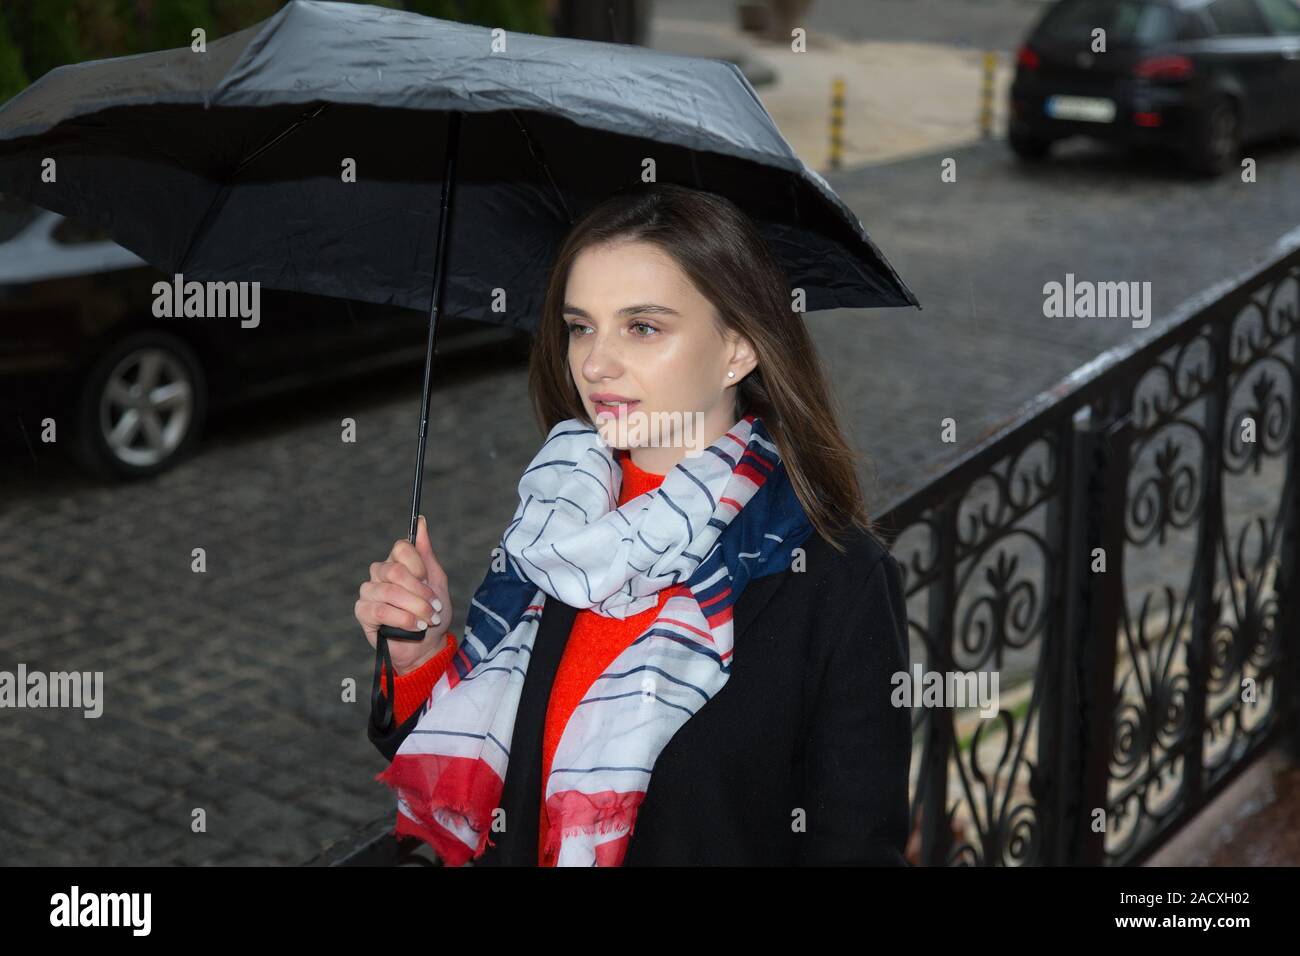 Portrait of young beautiful girl under a umbrella in rainy day. Happy young woman standing under umbrella in rain, laughing. Stock Photo